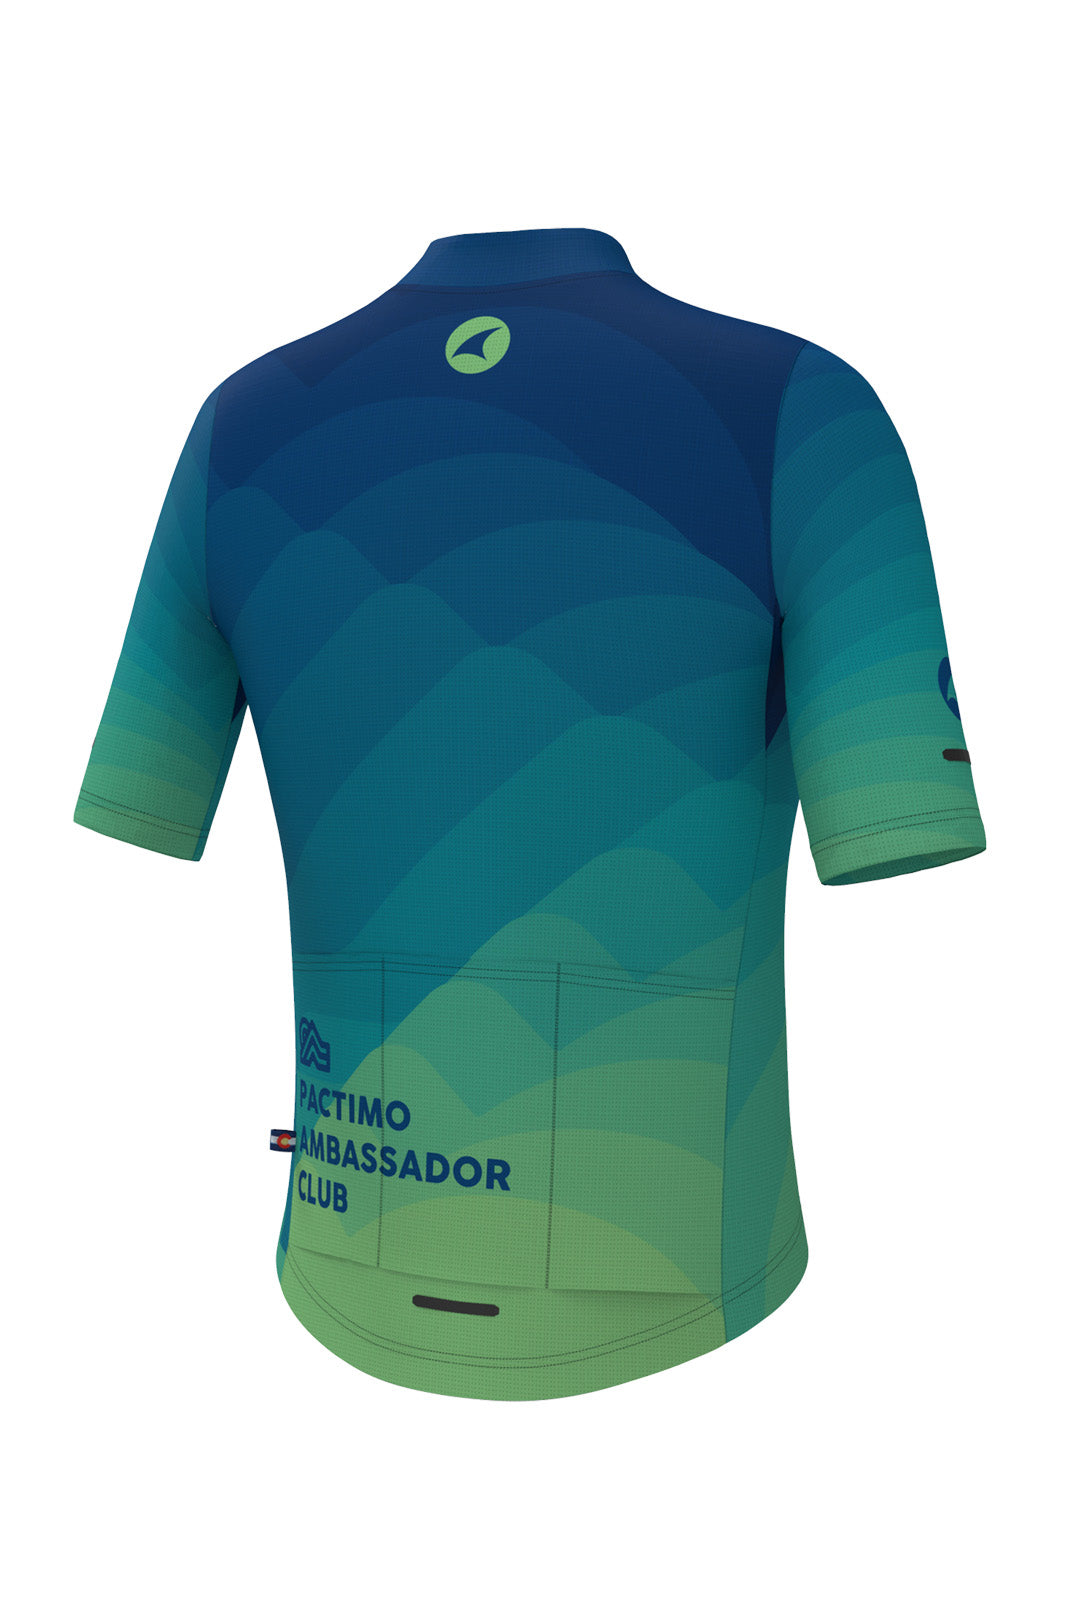 Women's PAC Ascent Aero Cycling Jersey - Twighlight Back